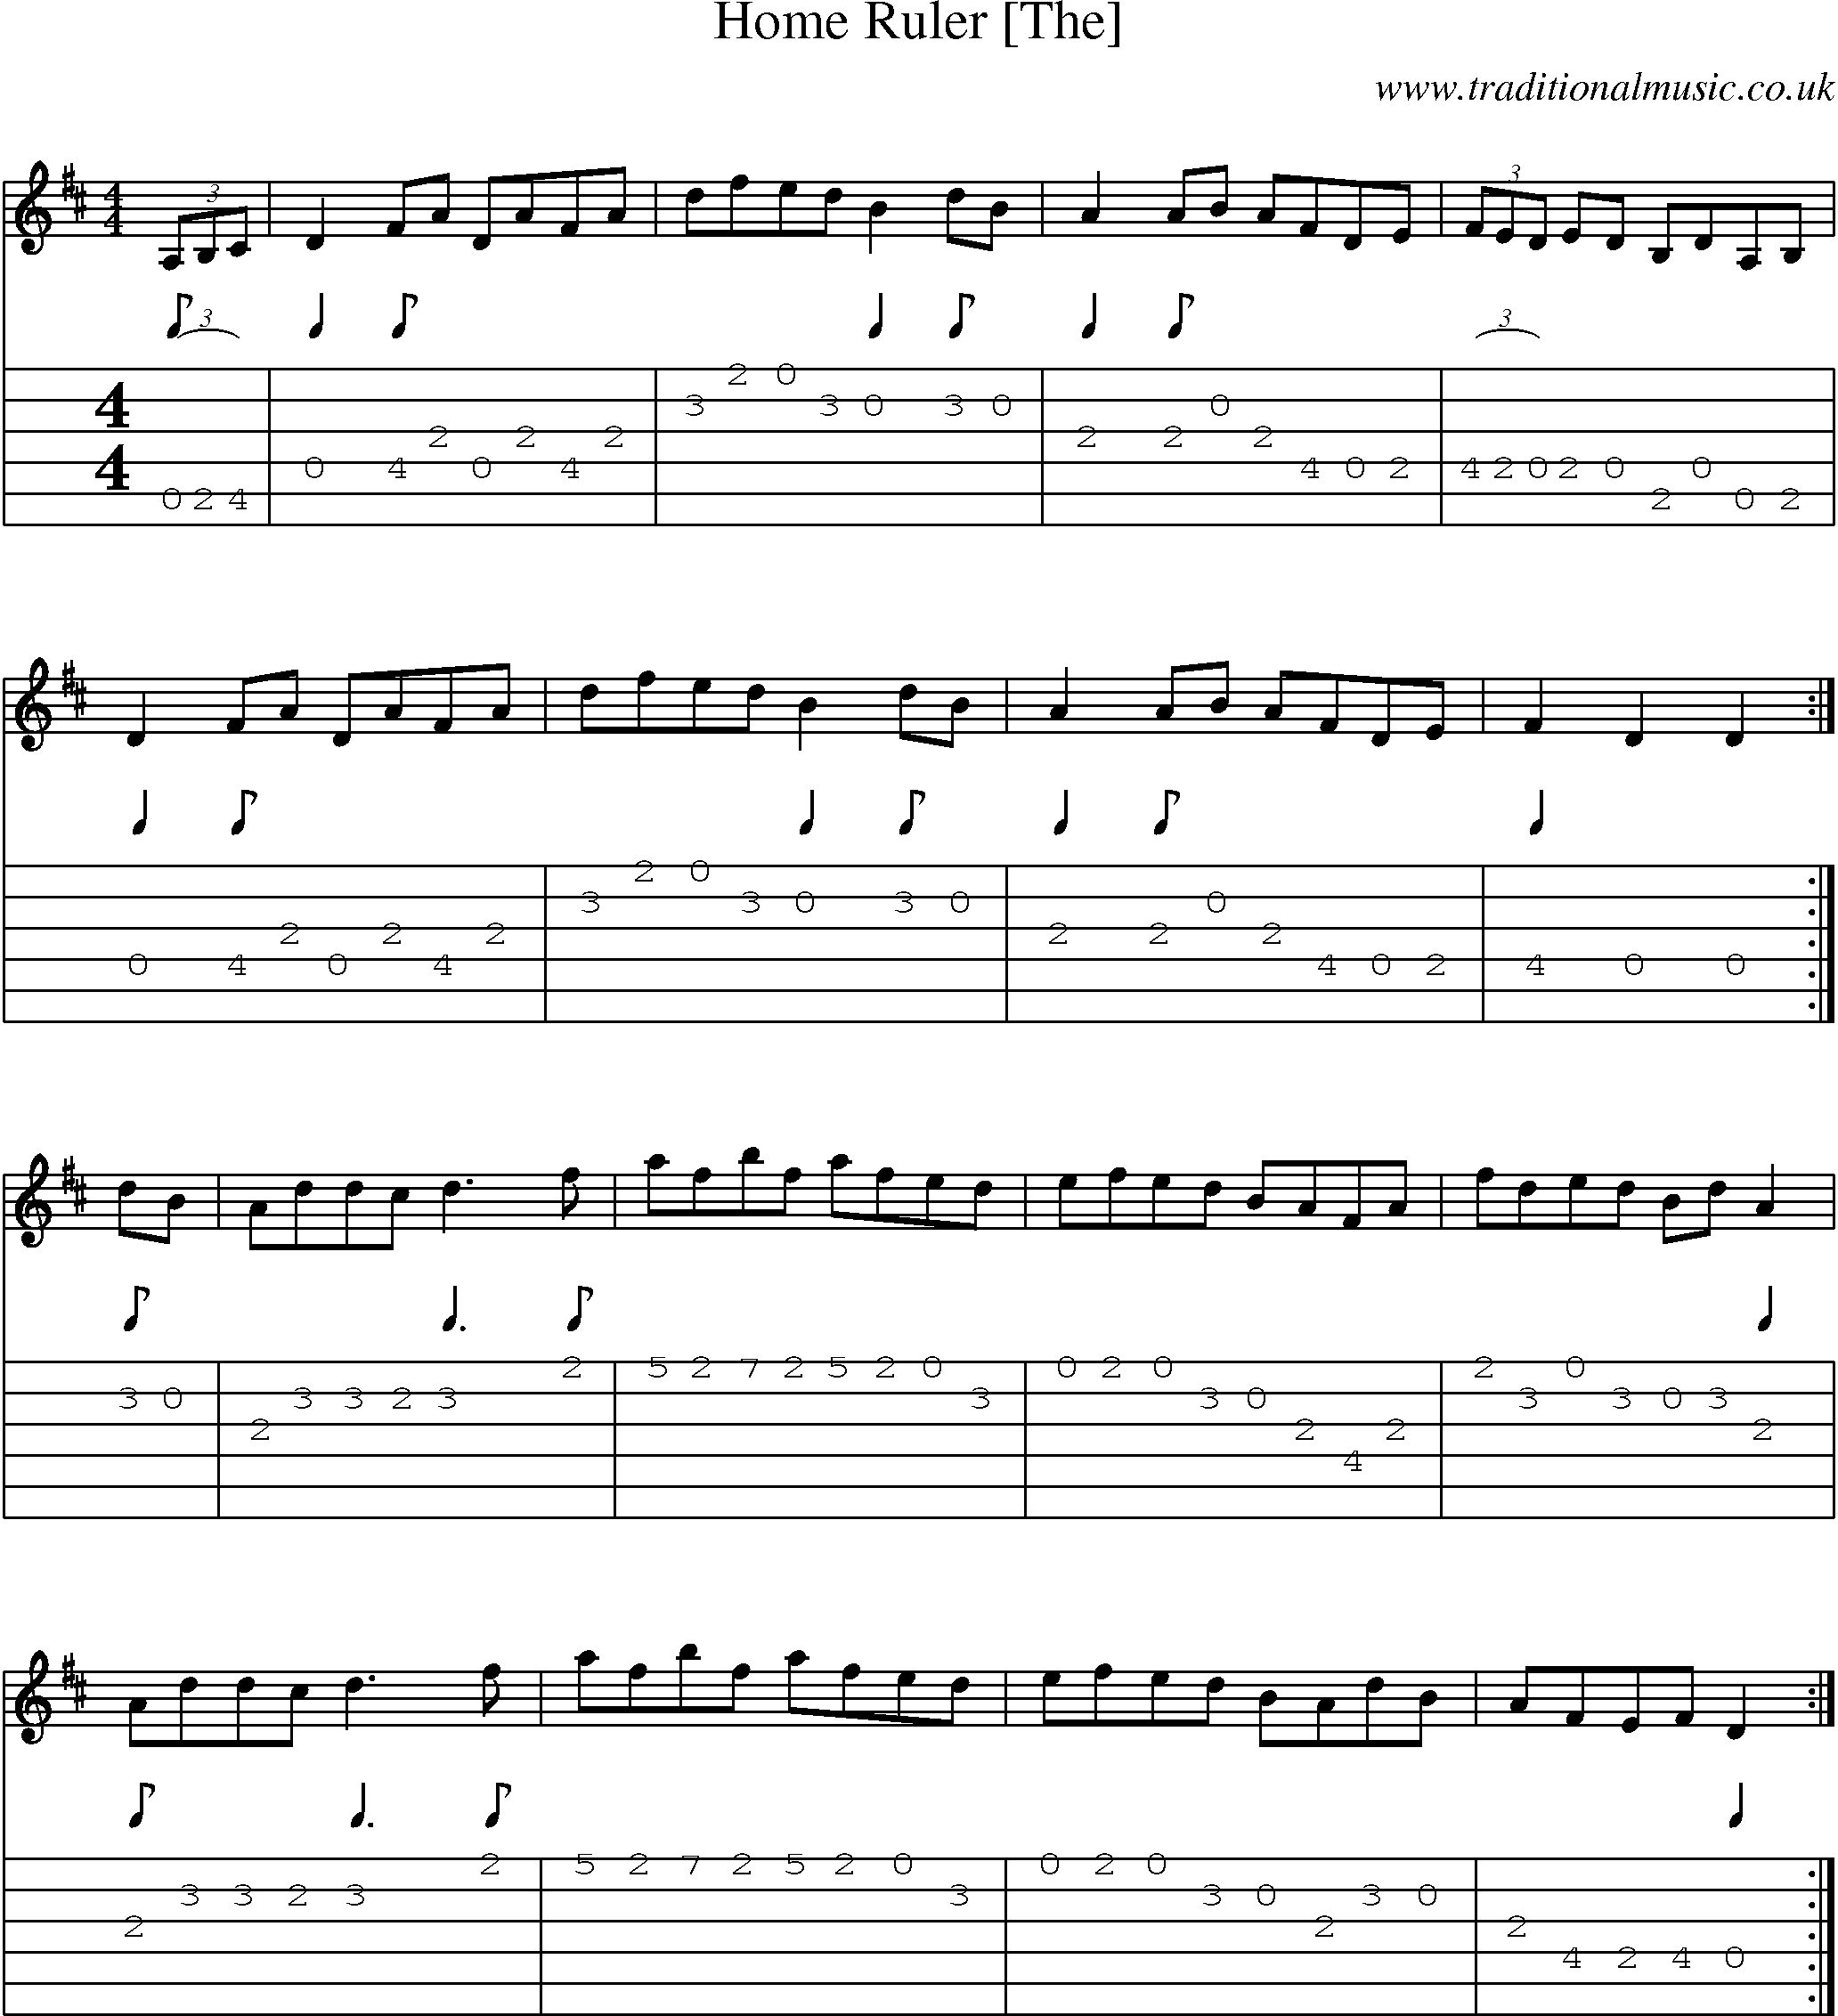 Music Score and Guitar Tabs for Home Ruler